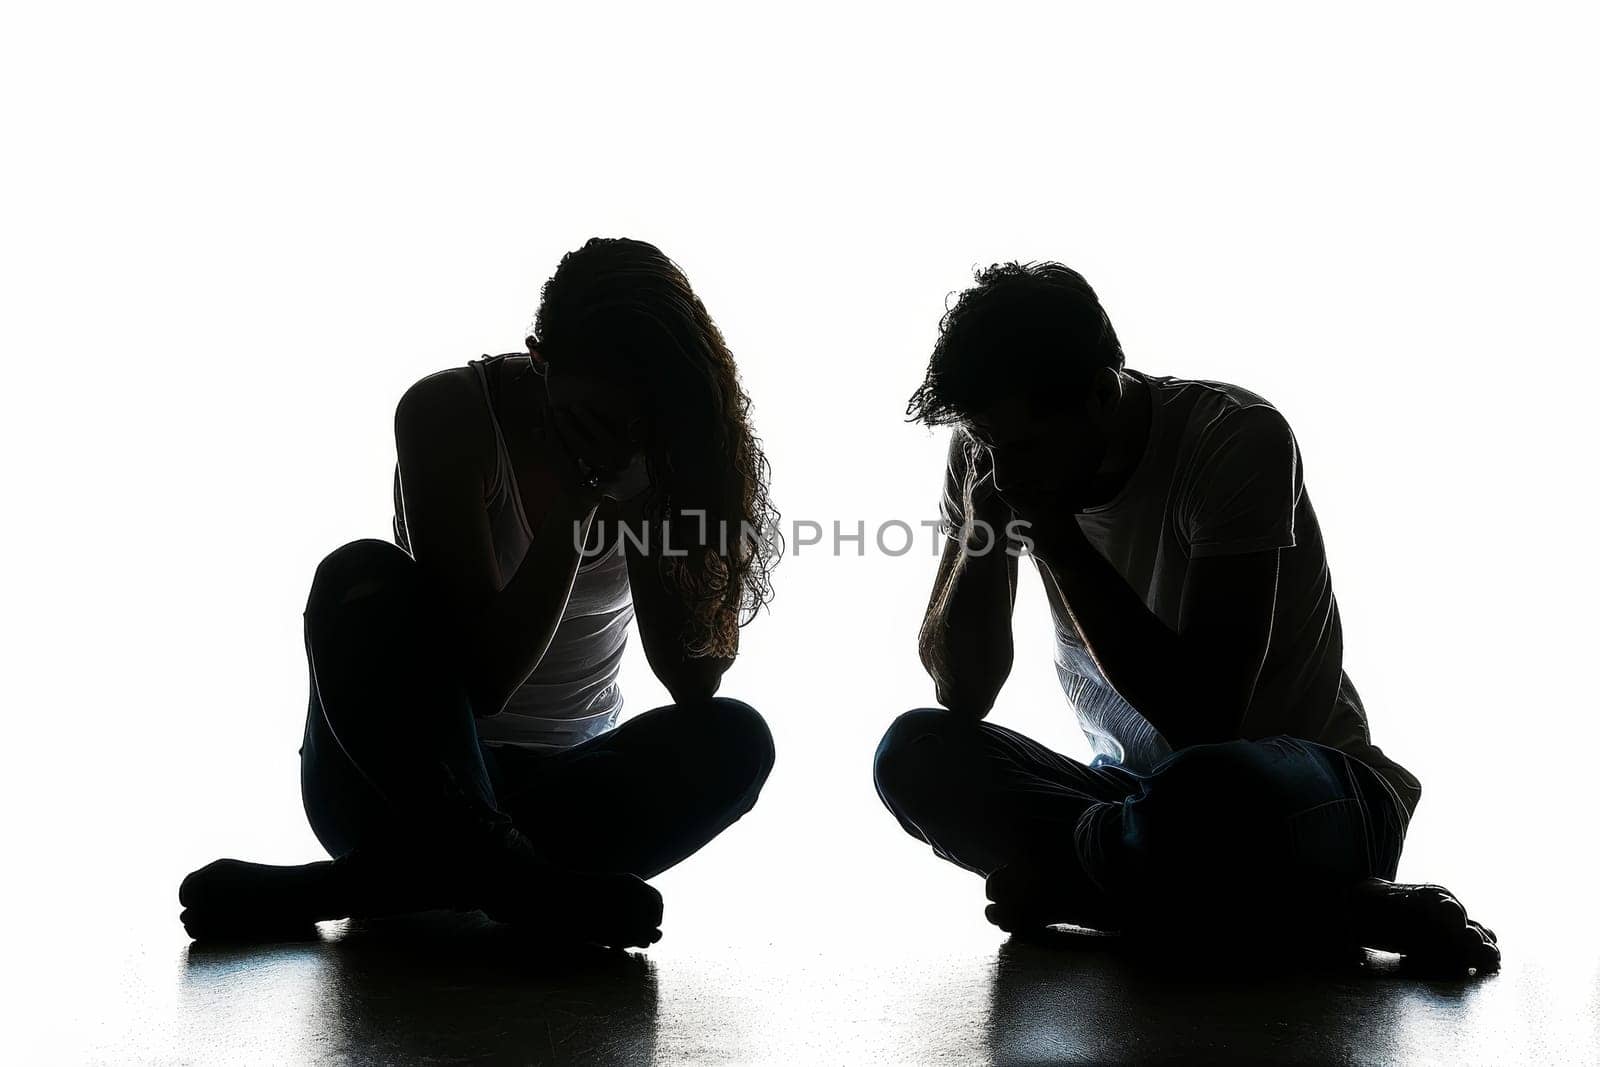 Two people are sitting on the floor, crying. Scene is sad and emotional